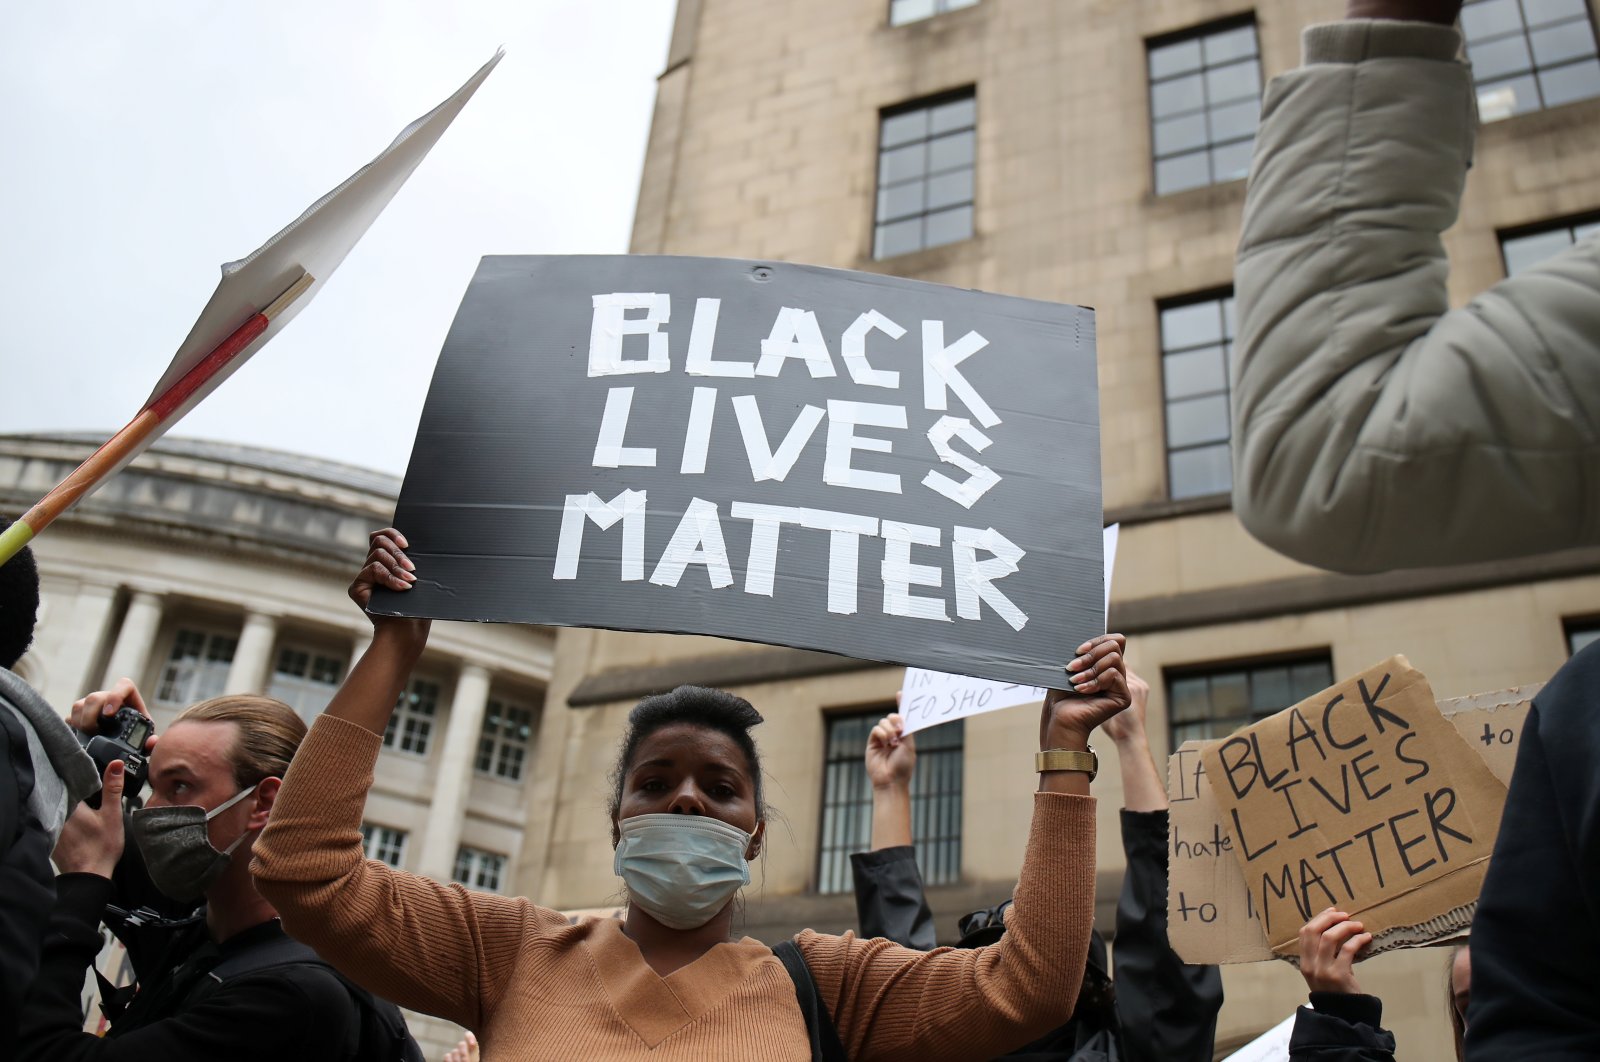 A demonstrator holds a sign during a Black Lives Matter protest in Manchester, following the death of George Floyd who died in police custody in Minneapolis, Manchester, Britain, June 7, 2020. (Reuters Photo)